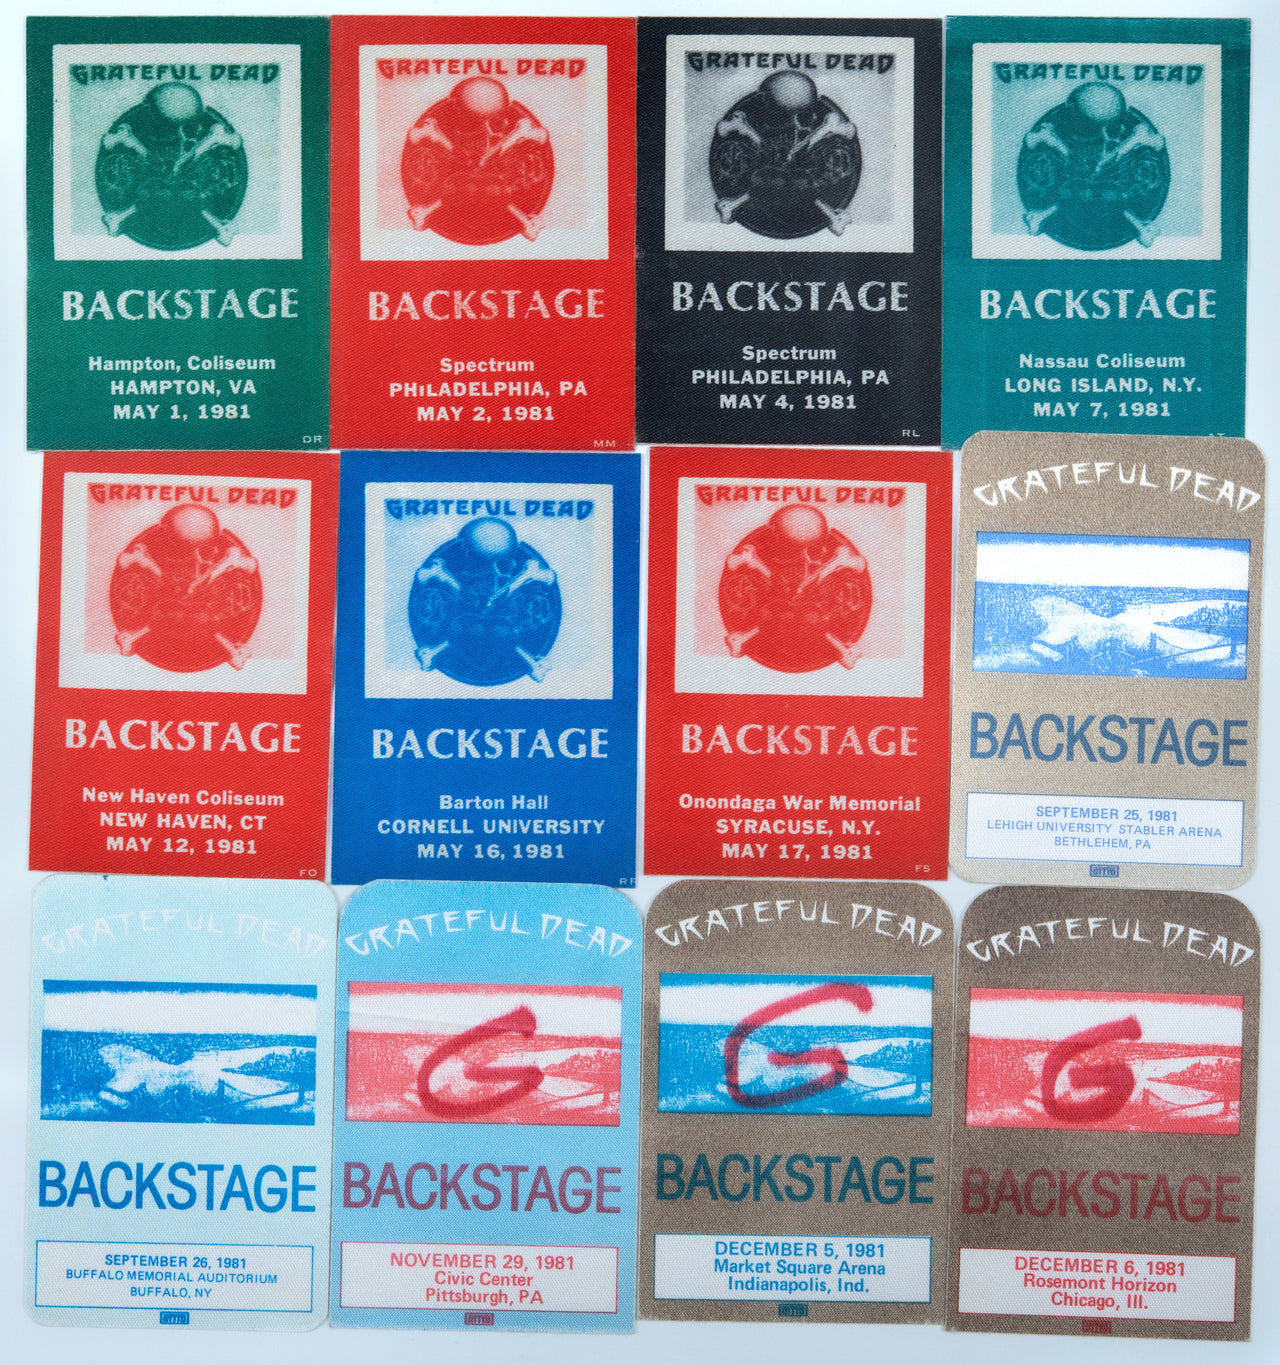 Grateful Dead Backstage Passes (5/1/1981 - 12/6/1981) from Dan Healy